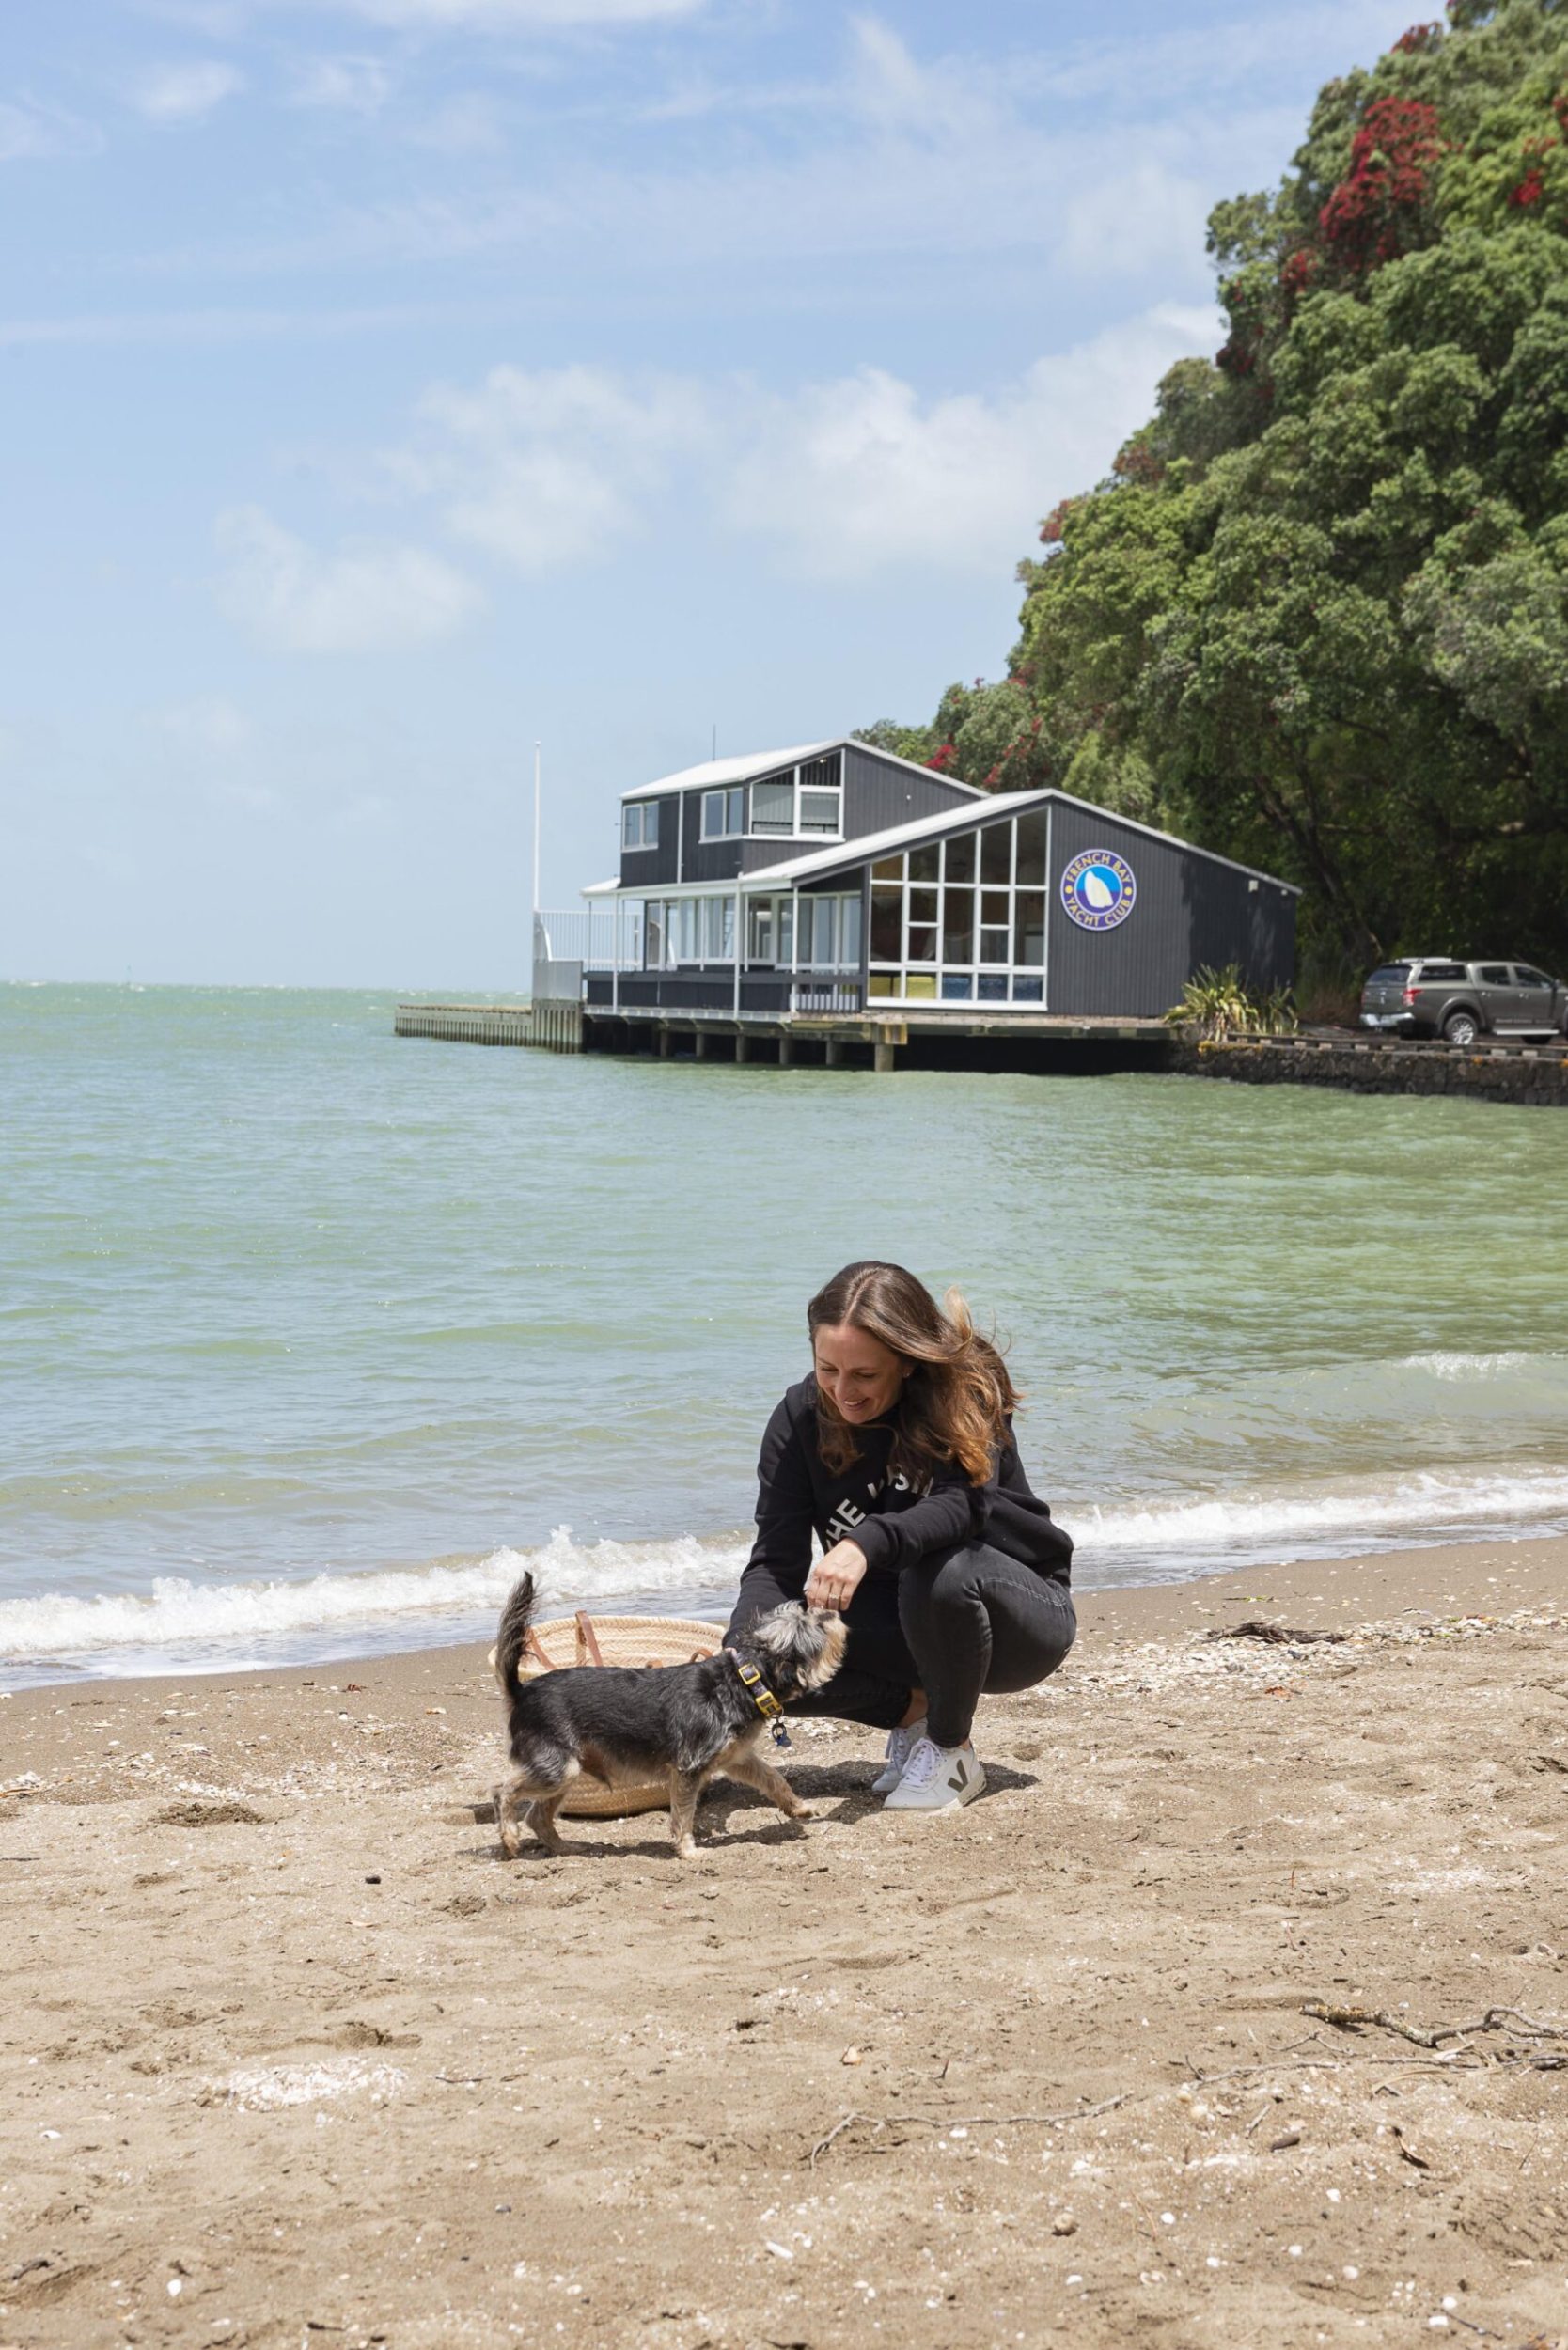 Claudia Zinzan and her dog at the beach